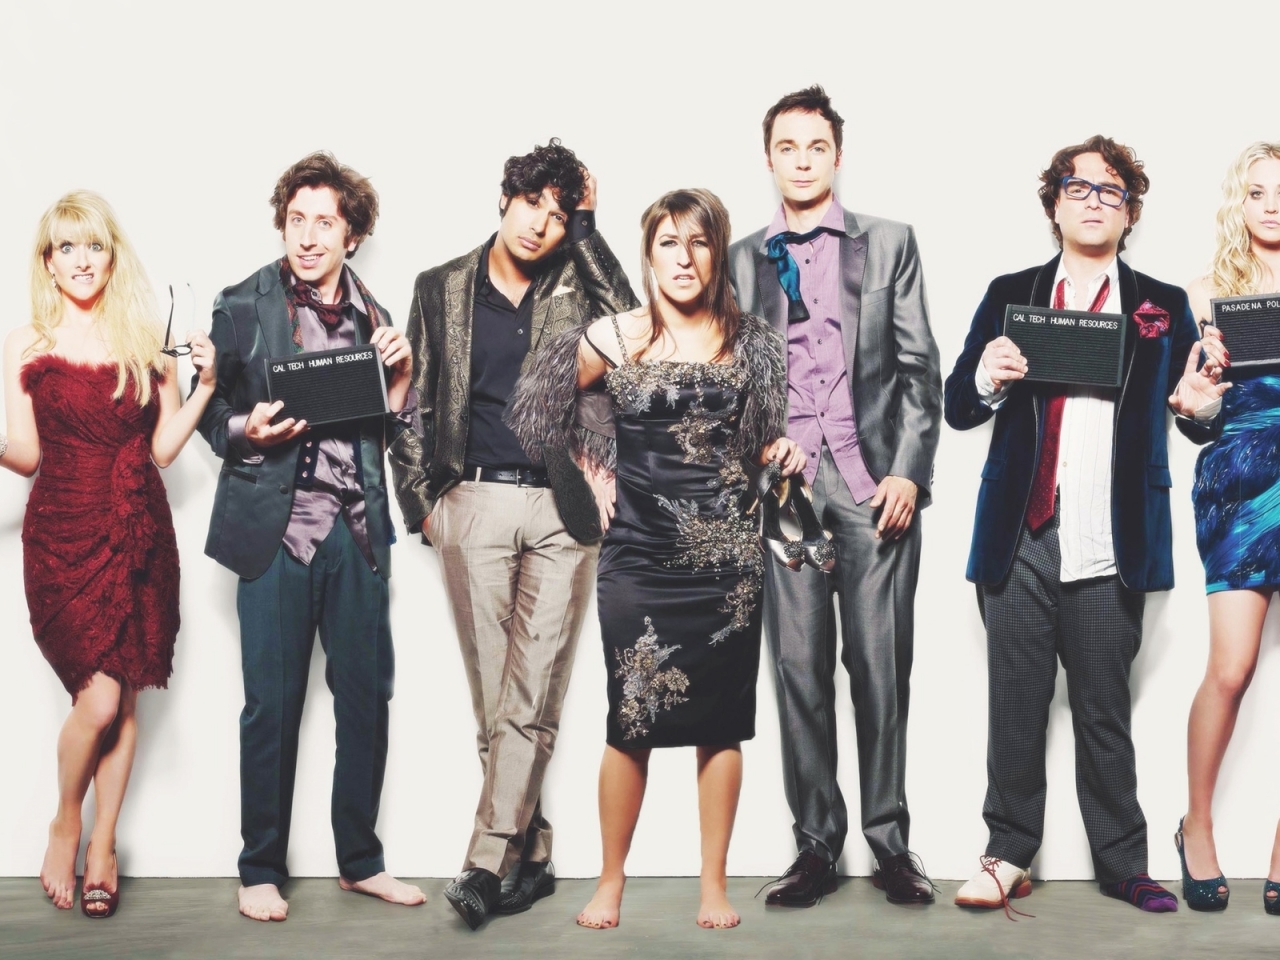 The Big Bang Theory Cast for 1280 x 960 resolution